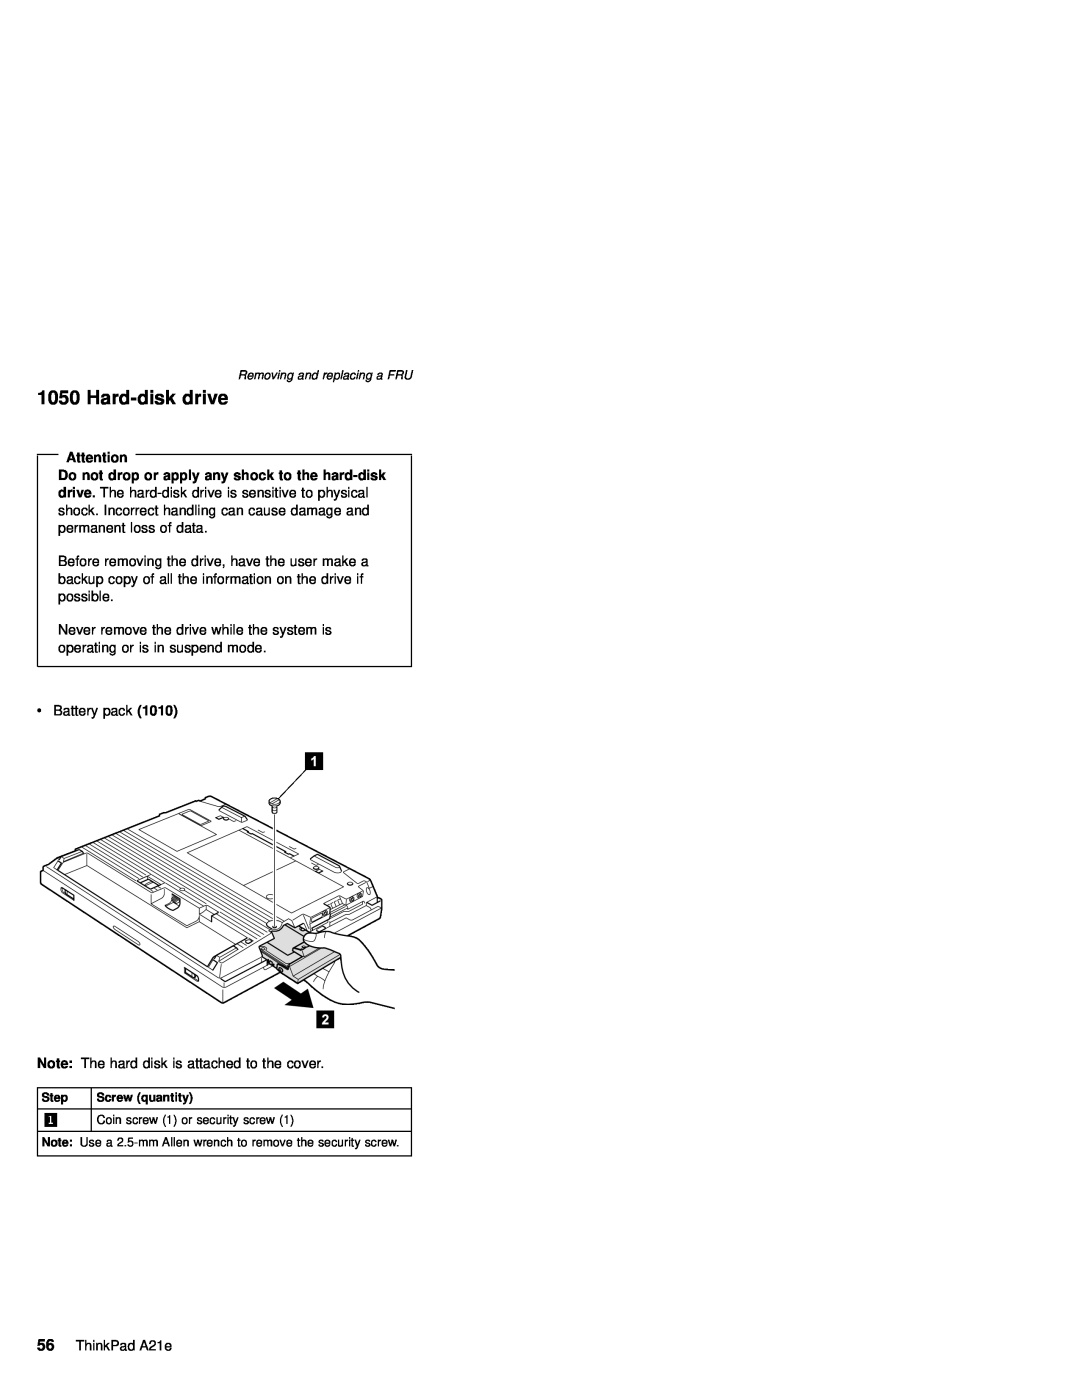 IBM MT 2632 manual Hard-disk drive, Do not drop or apply any shock to the hard-disk 